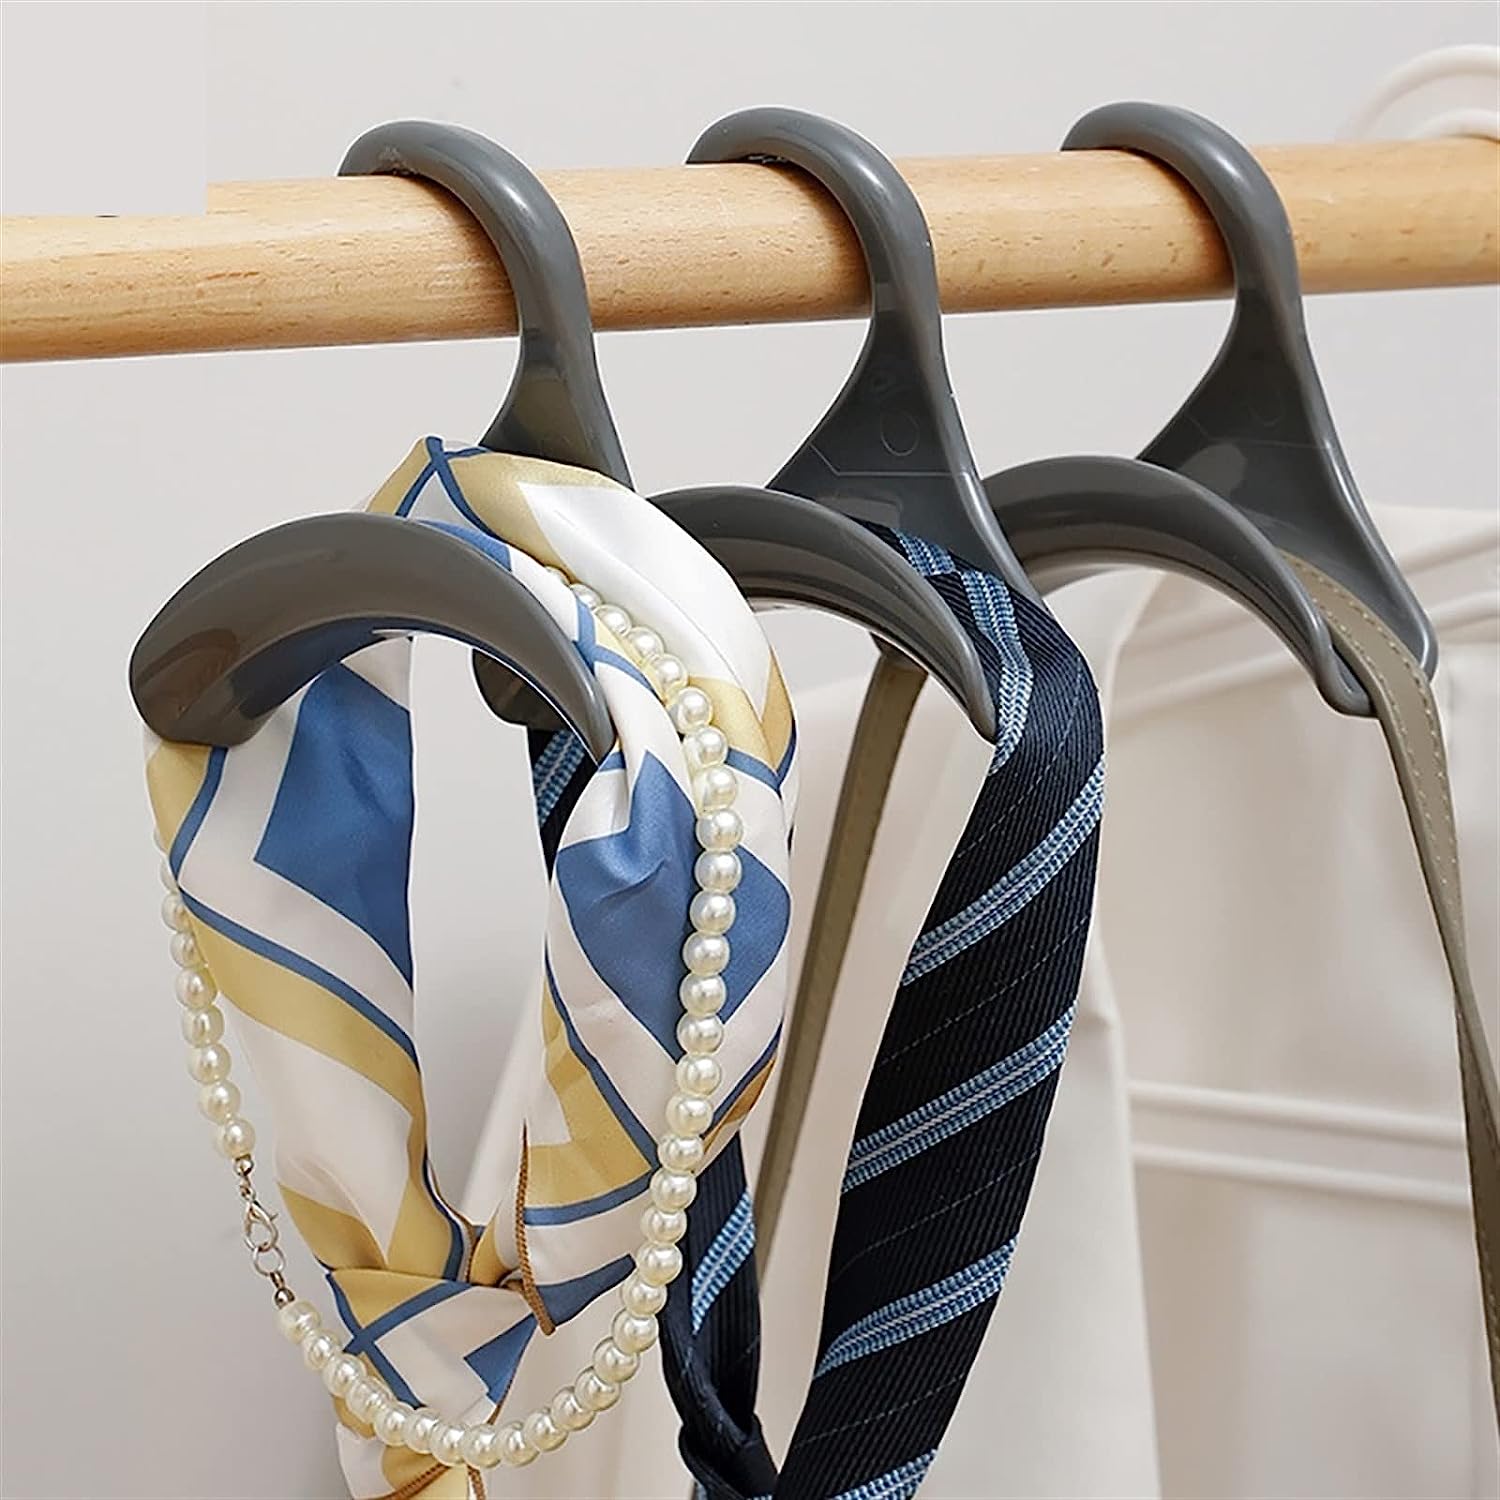 Efficiently organized rack showcasing various bags hung on specialized hanger hooks, ideal for saving space while organizing bags, belts, and scarves